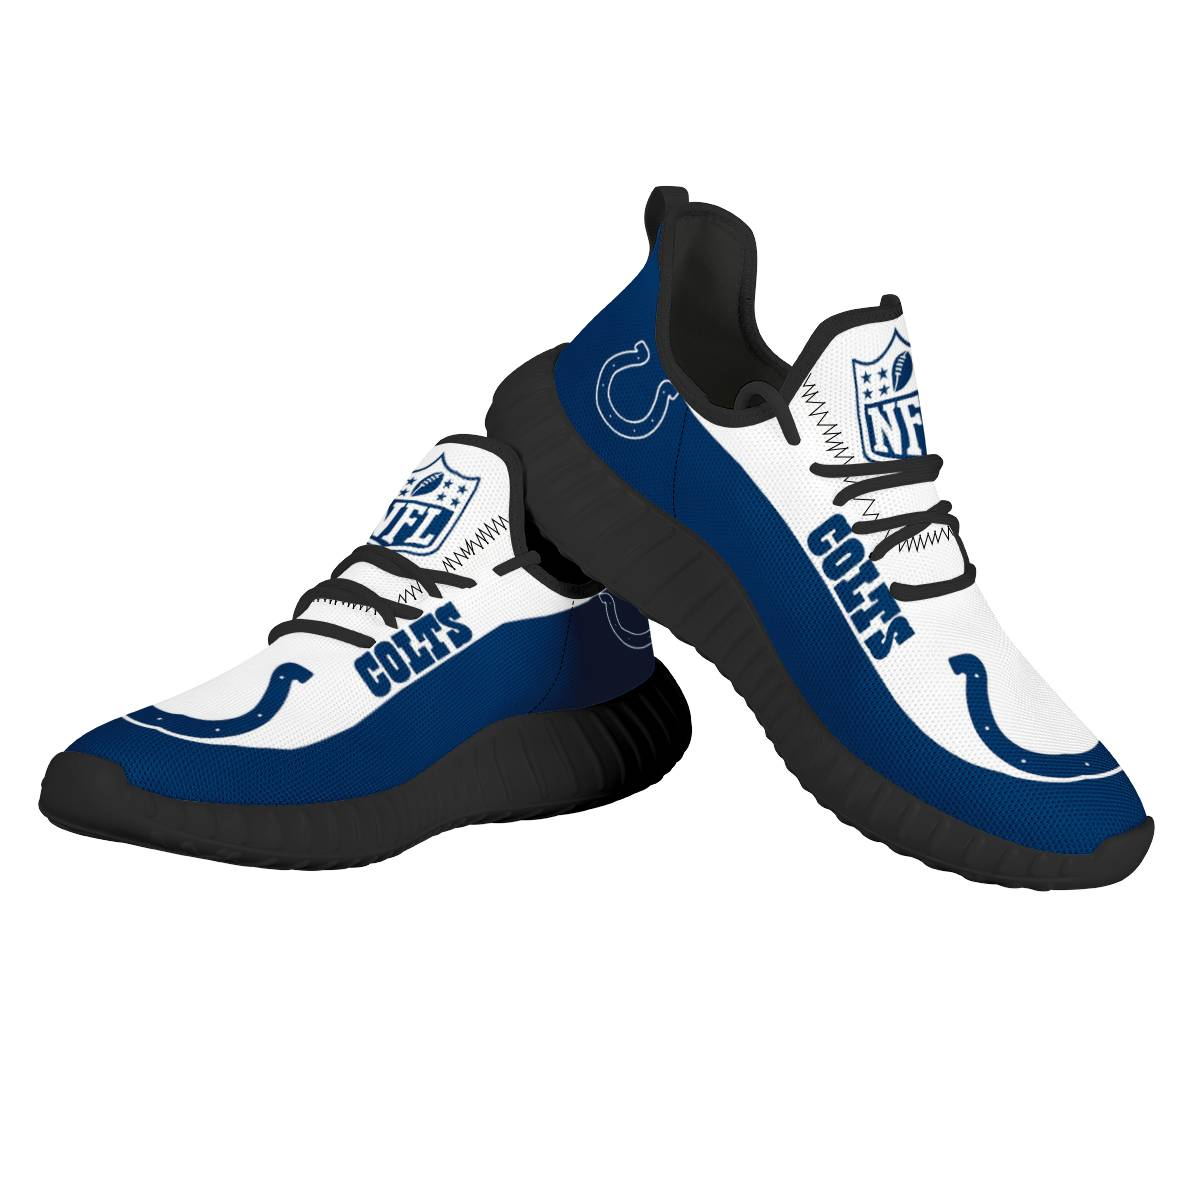 Men's NFL Indianapolis Colts Mesh Knit Sneakers/Shoes 002